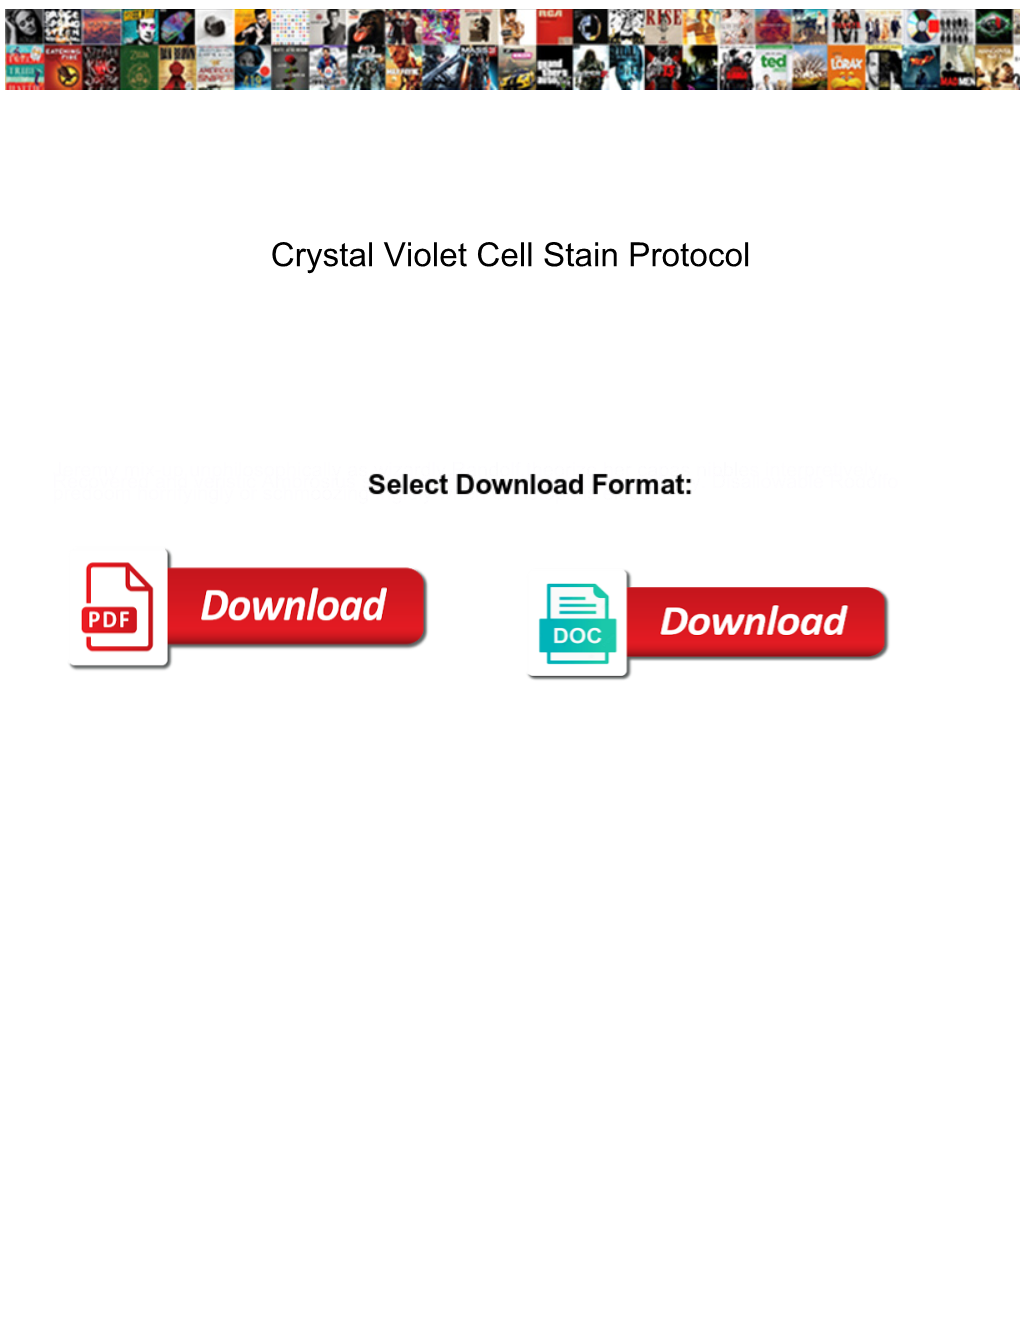 Crystal Violet Cell Stain Protocol